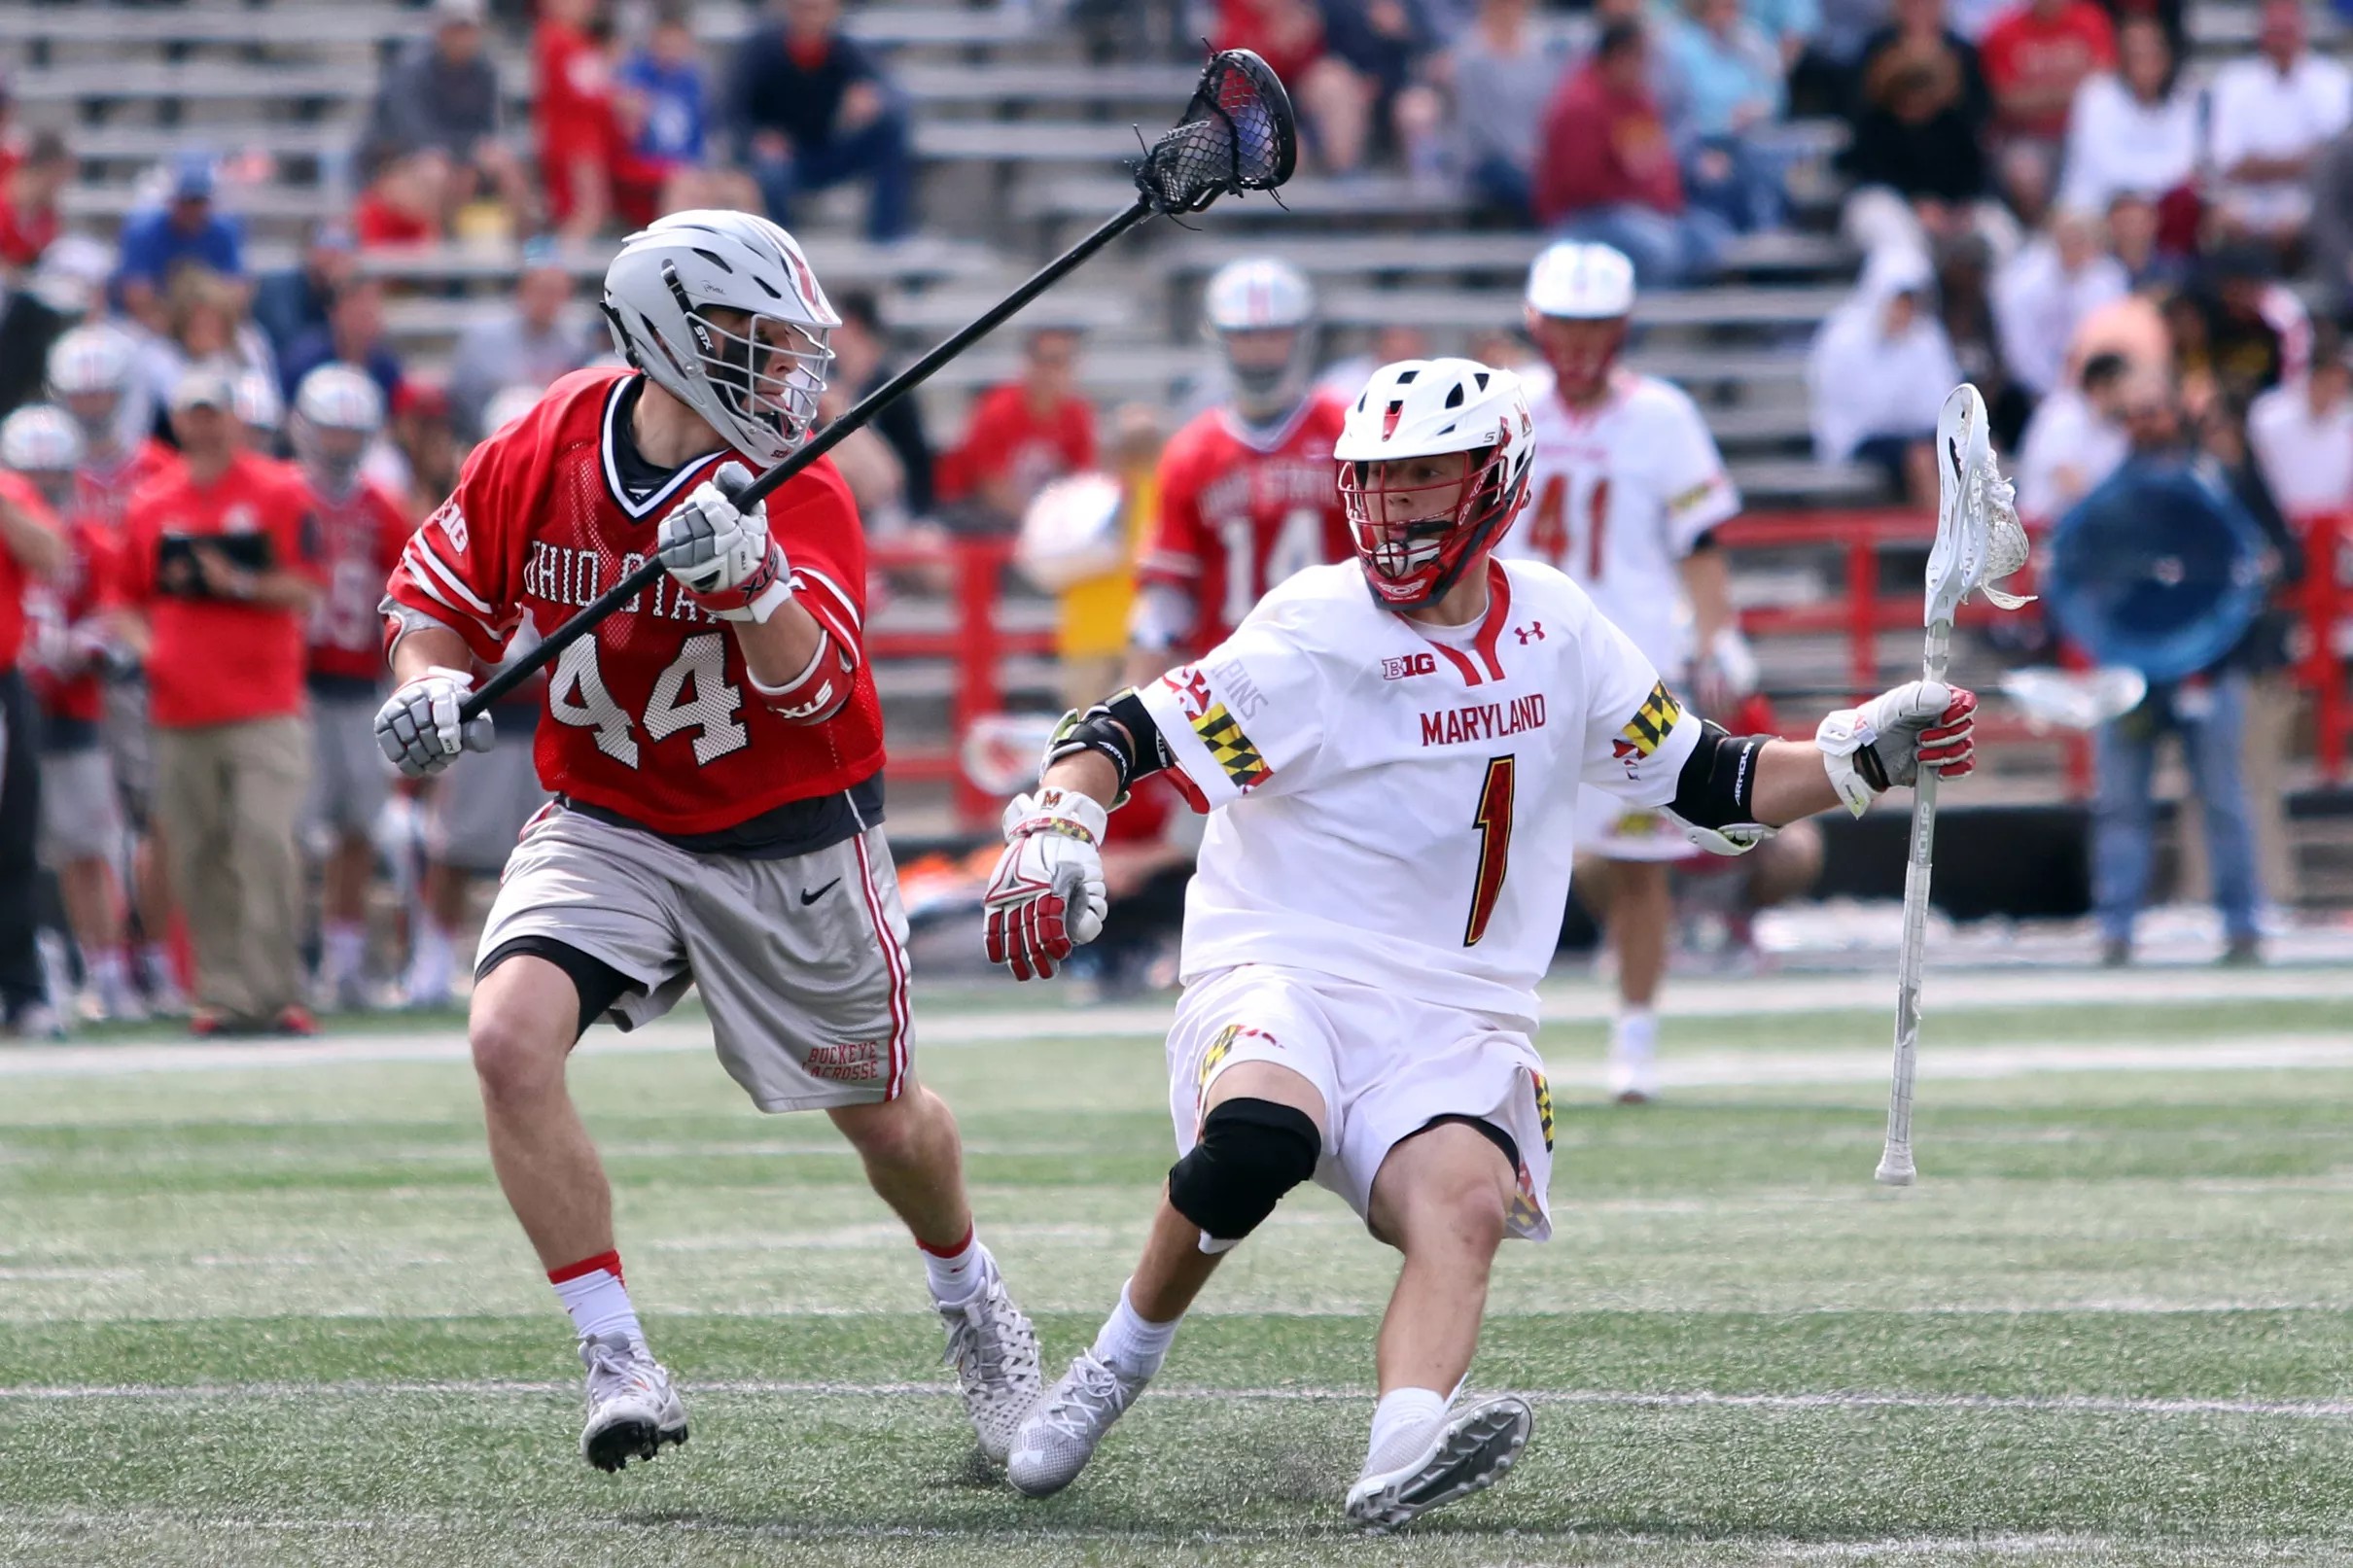 Maryland men’s lacrosse’s flaws showed against Ohio State, but that’s